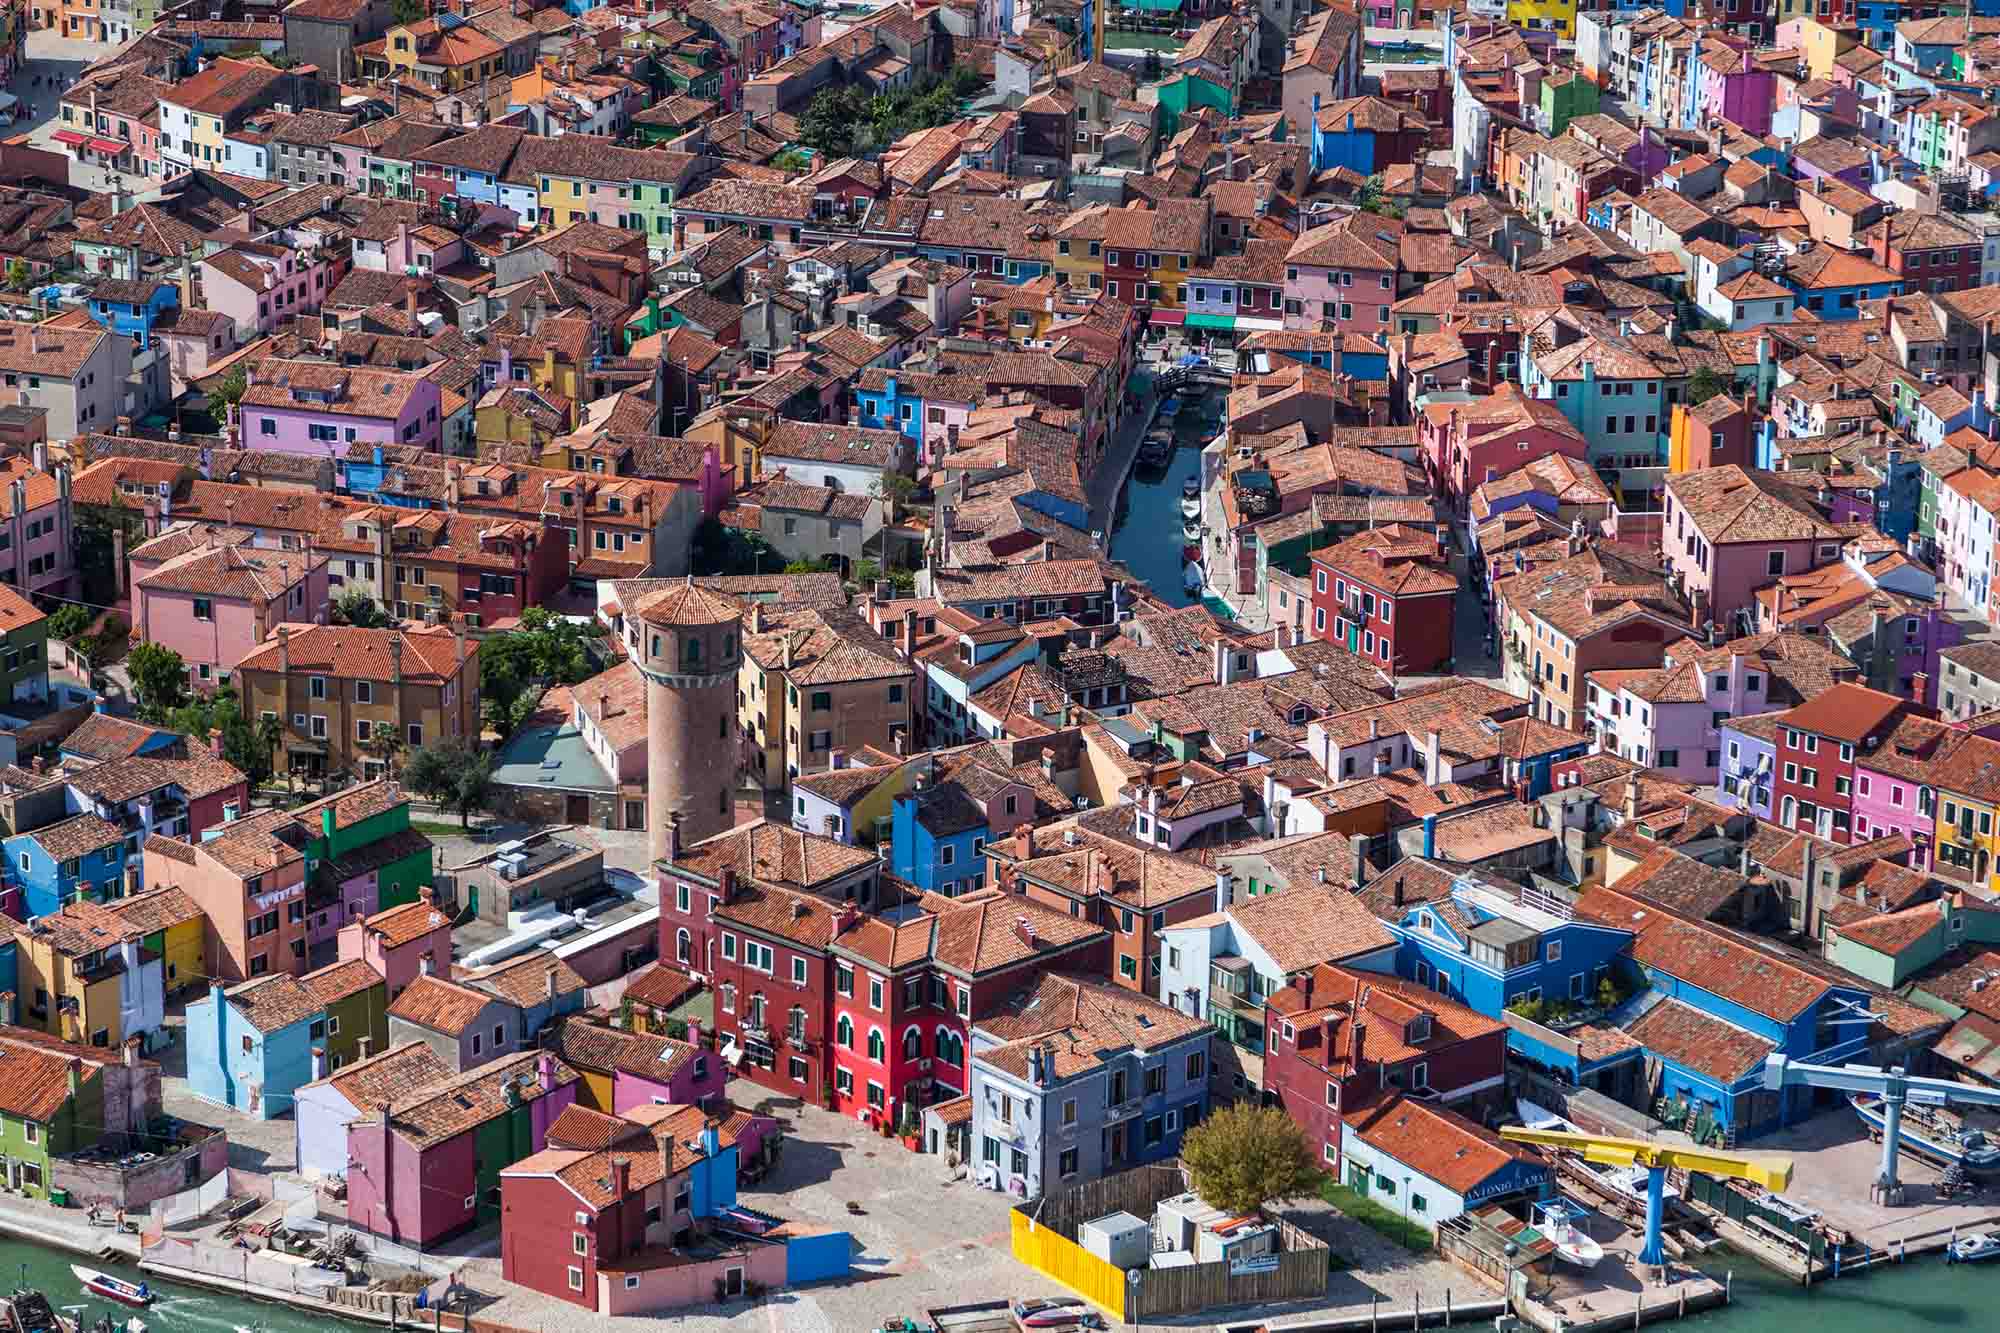 Alex MacLean, 'Brightly Painted Houses, Burano, Italy, 2010'